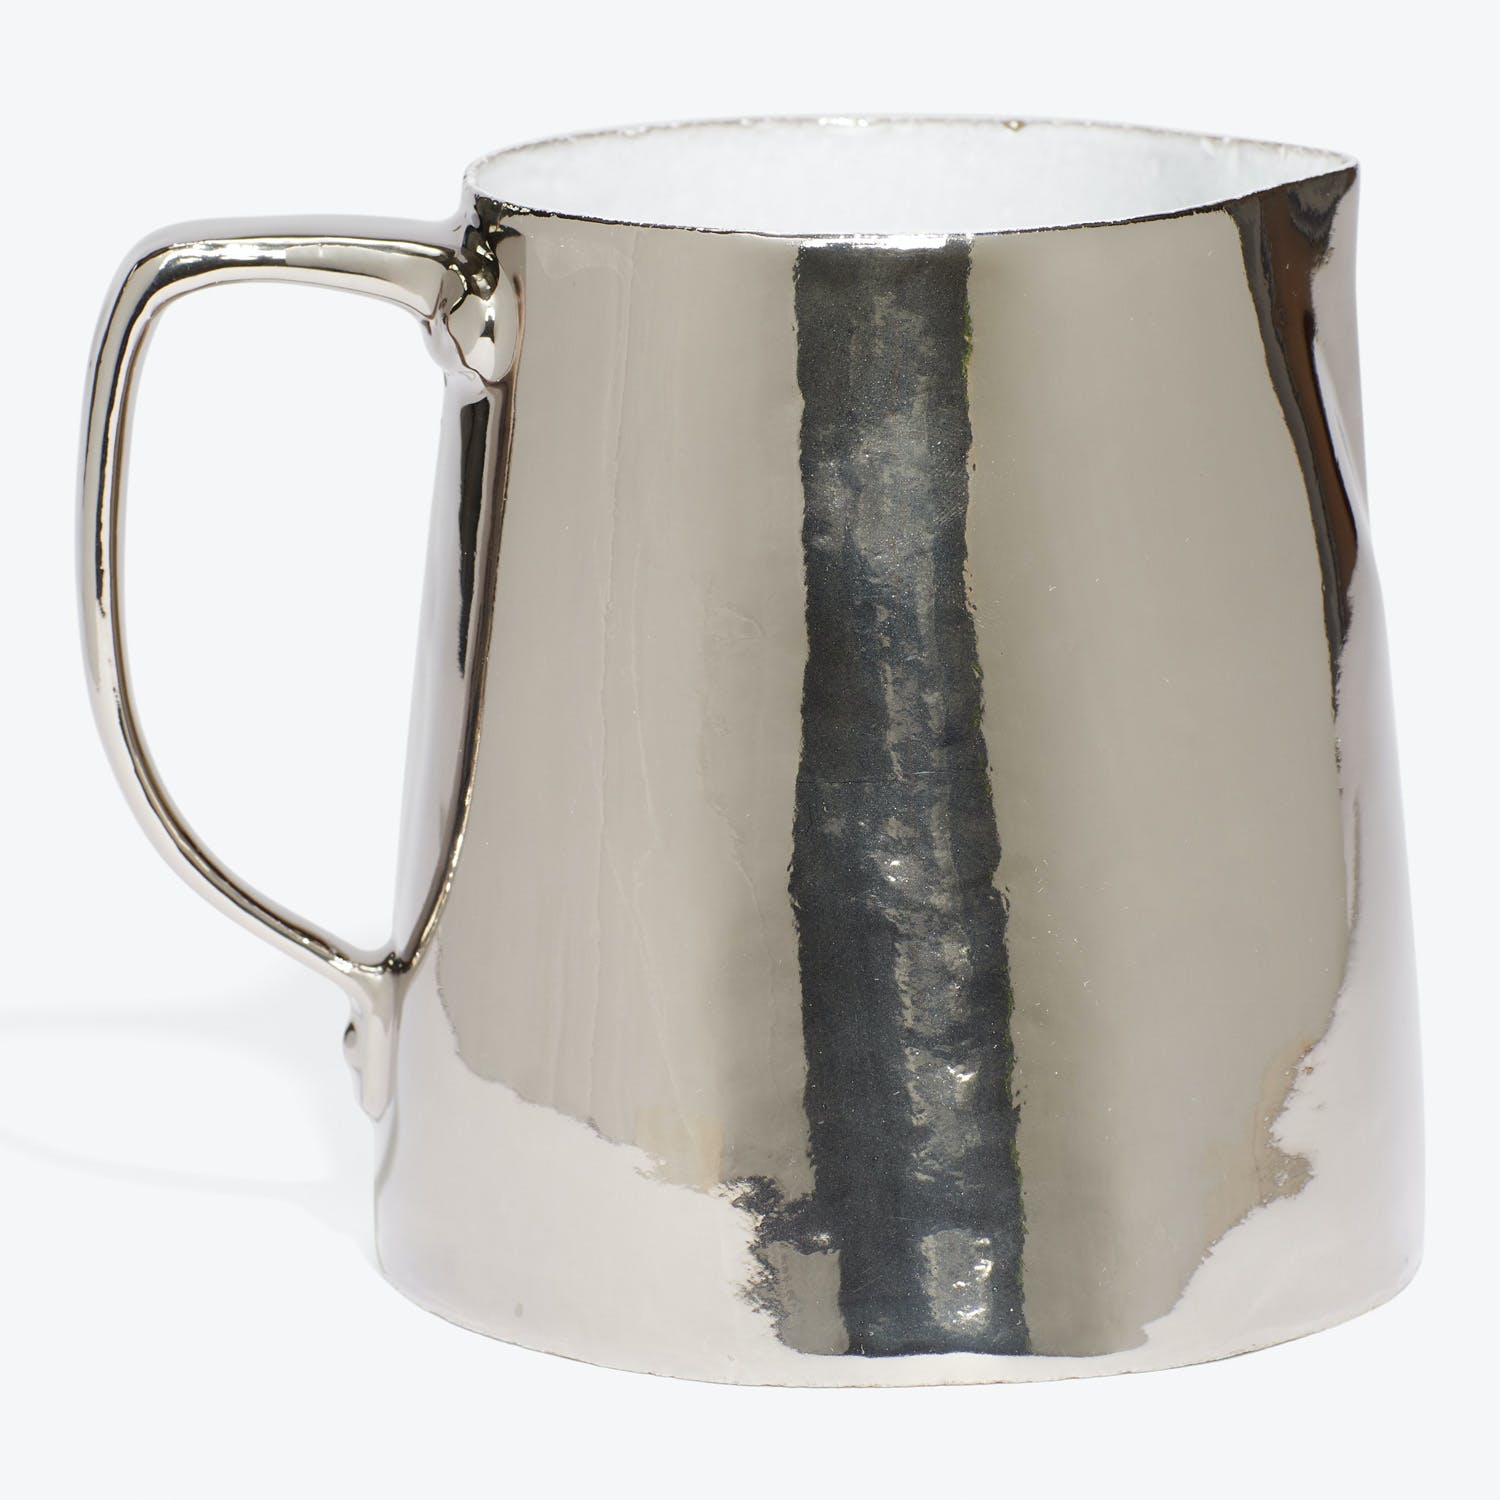 Highly reflective silver pitcher with signs of wear and tarnishing.